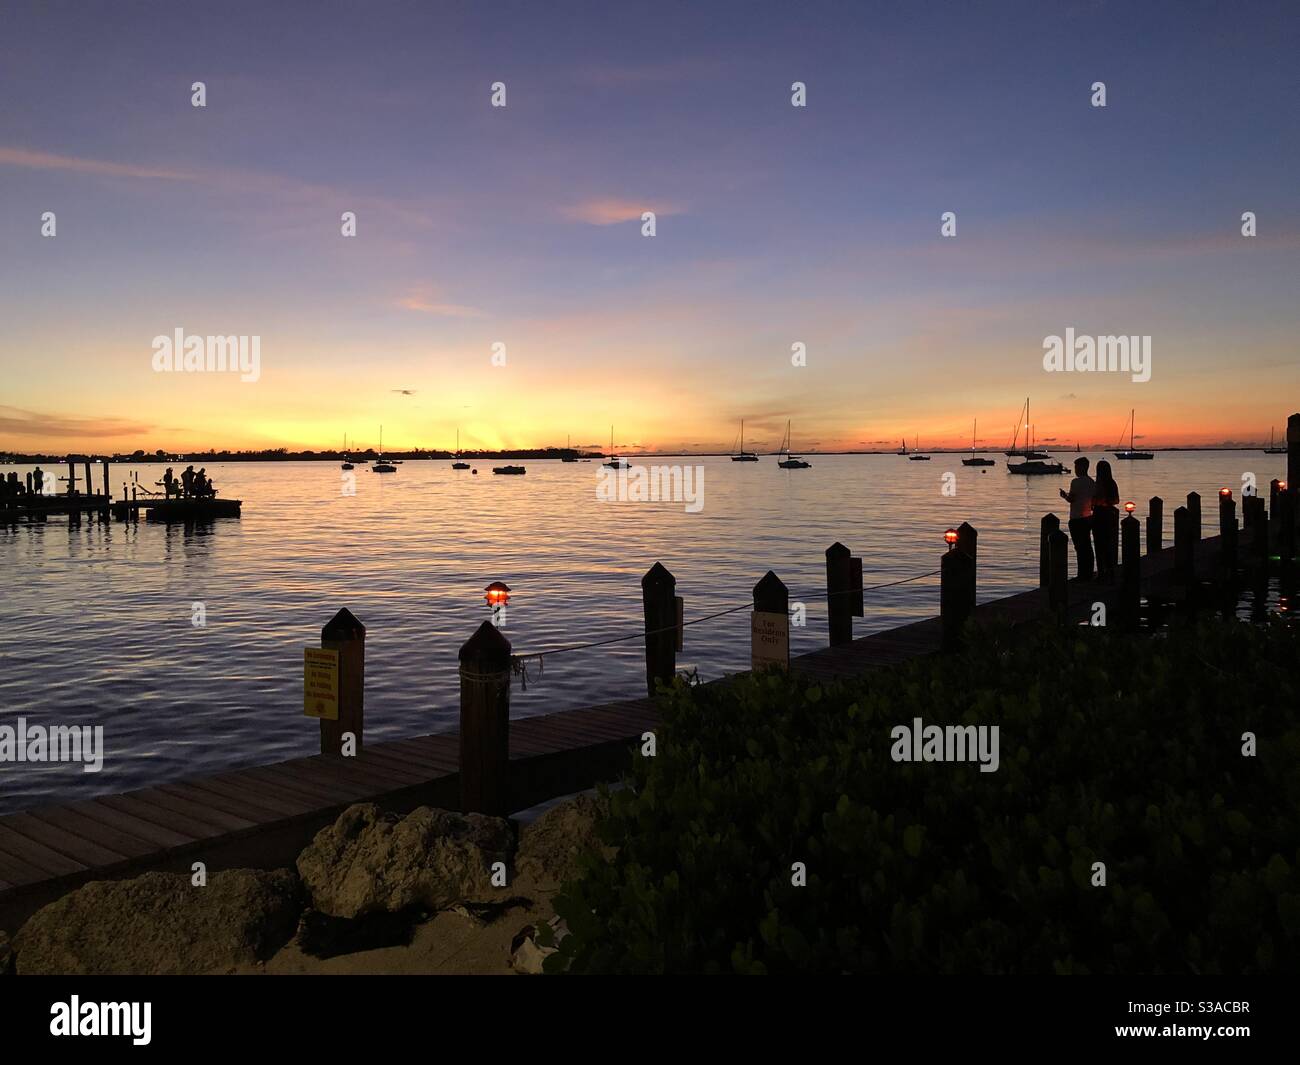 Sunset over bayside with a couple in silhouette standing by a pier in Key Largo, Florida USA. Stock Photo